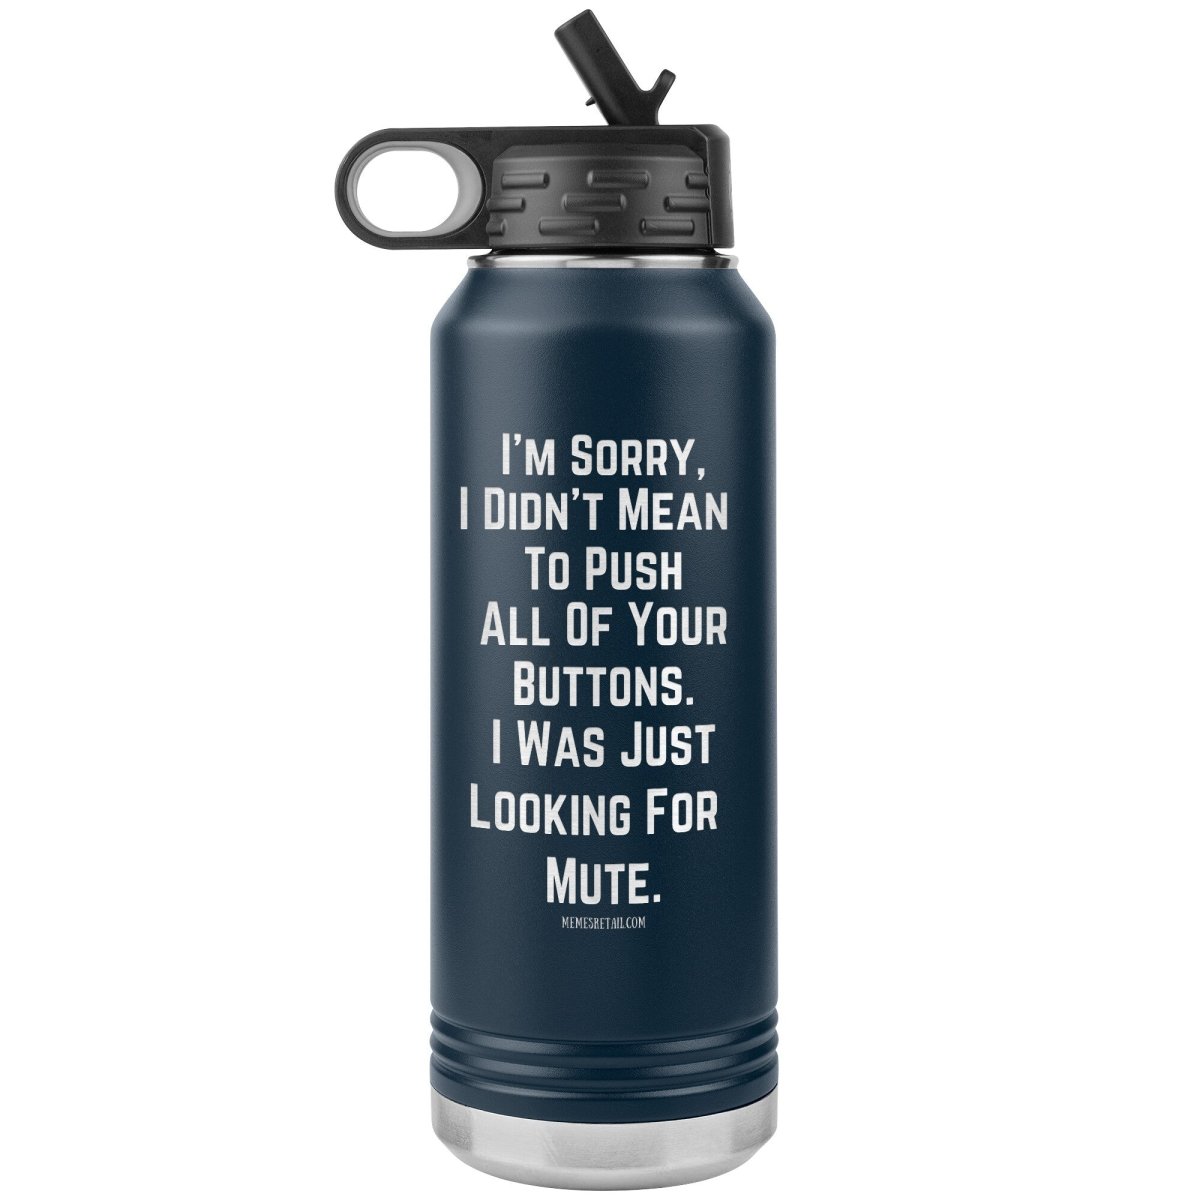 I’m sorry, I didn’t mean to push all your buttons, I was just looking for mute 32 oz water tumbler, Navy - MemesRetail.com